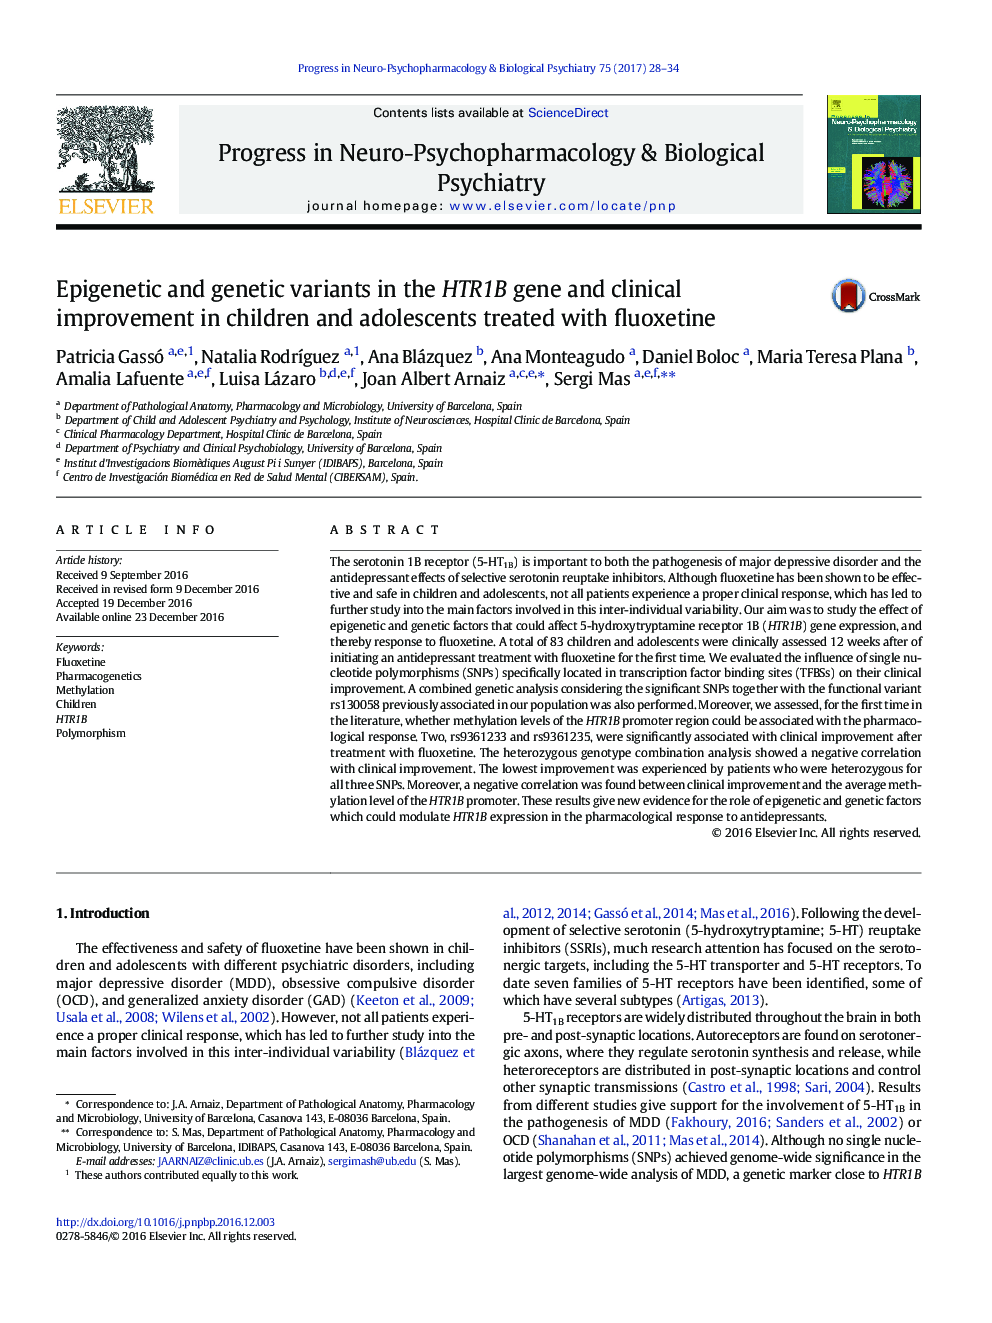 Epigenetic and genetic variants in the HTR1B gene and clinical improvement in children and adolescents treated with fluoxetine